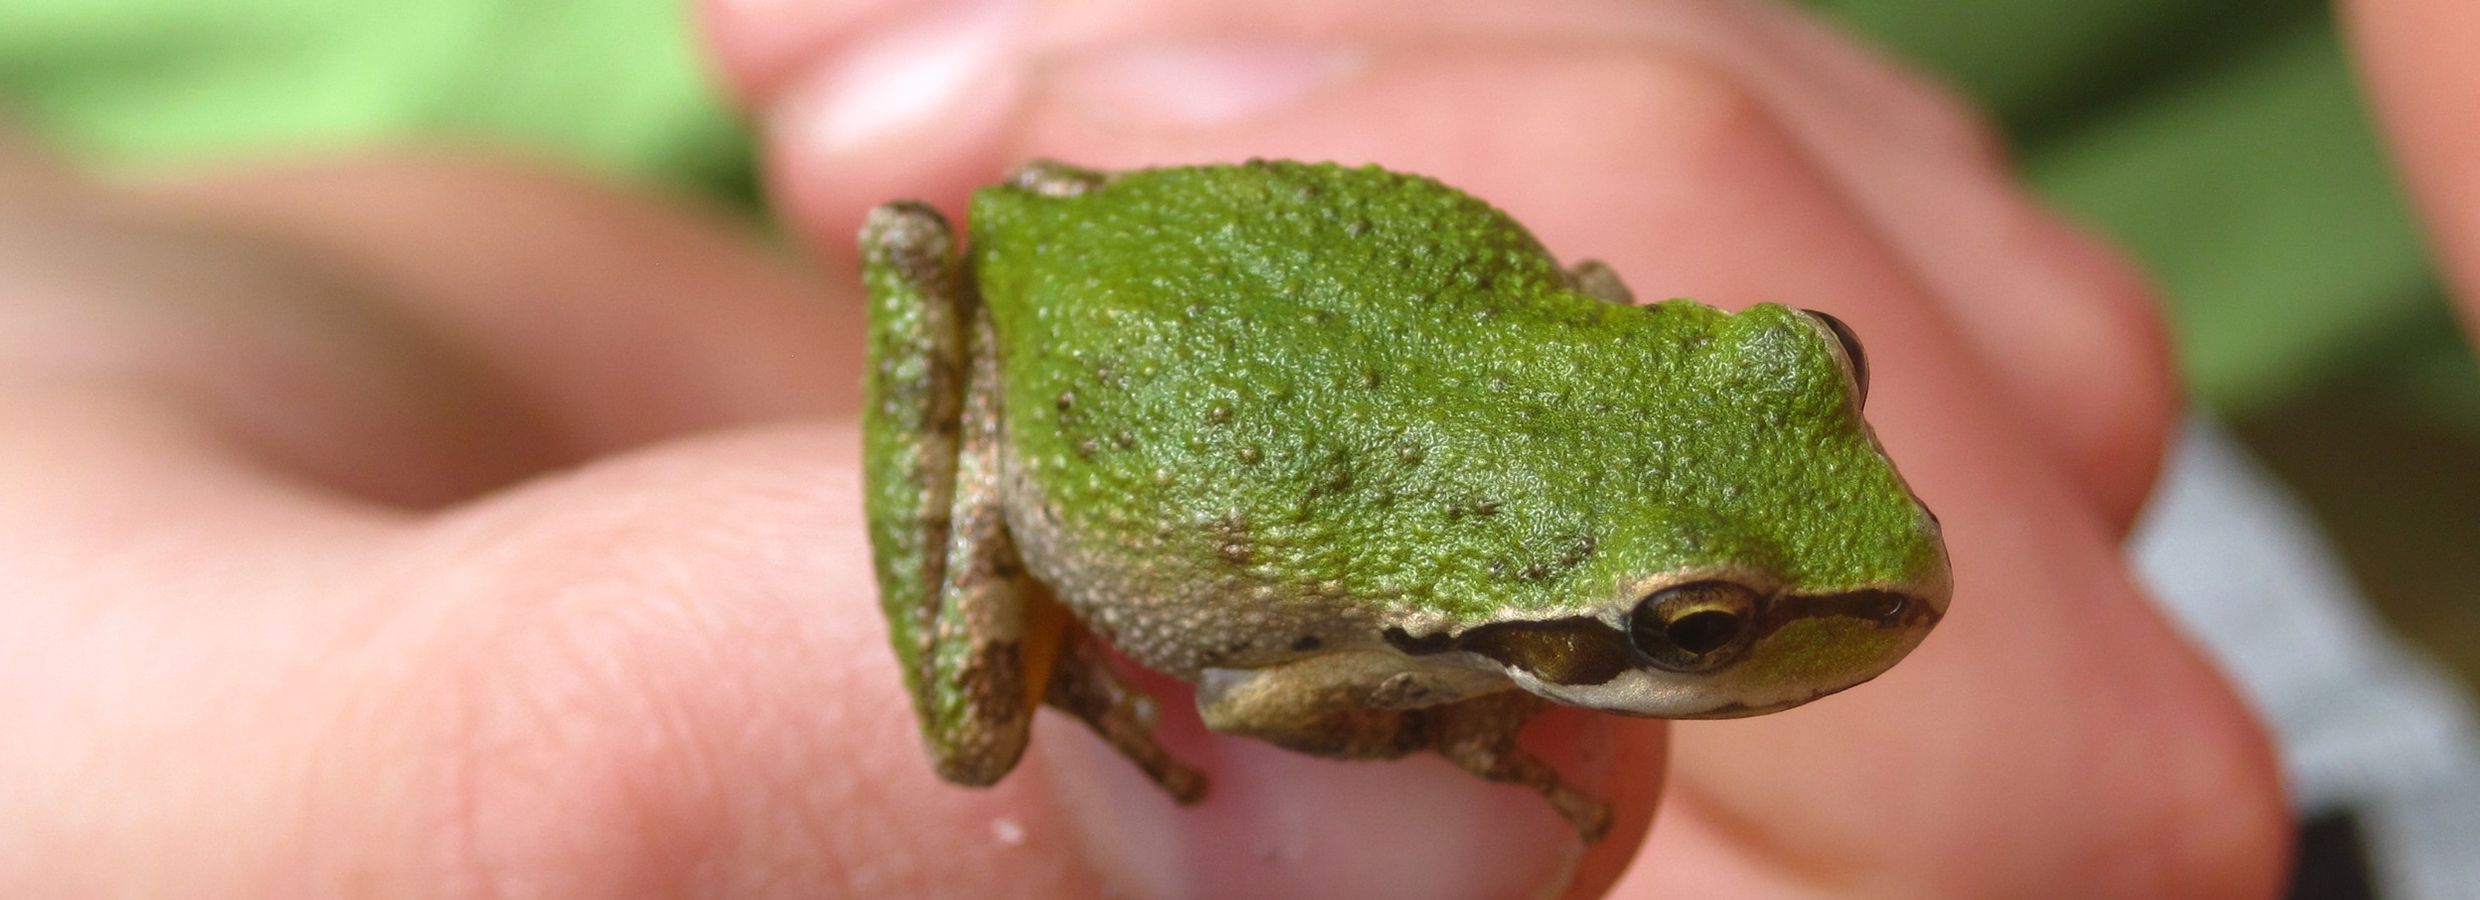 Tree Frog Care Sheet & Supplies